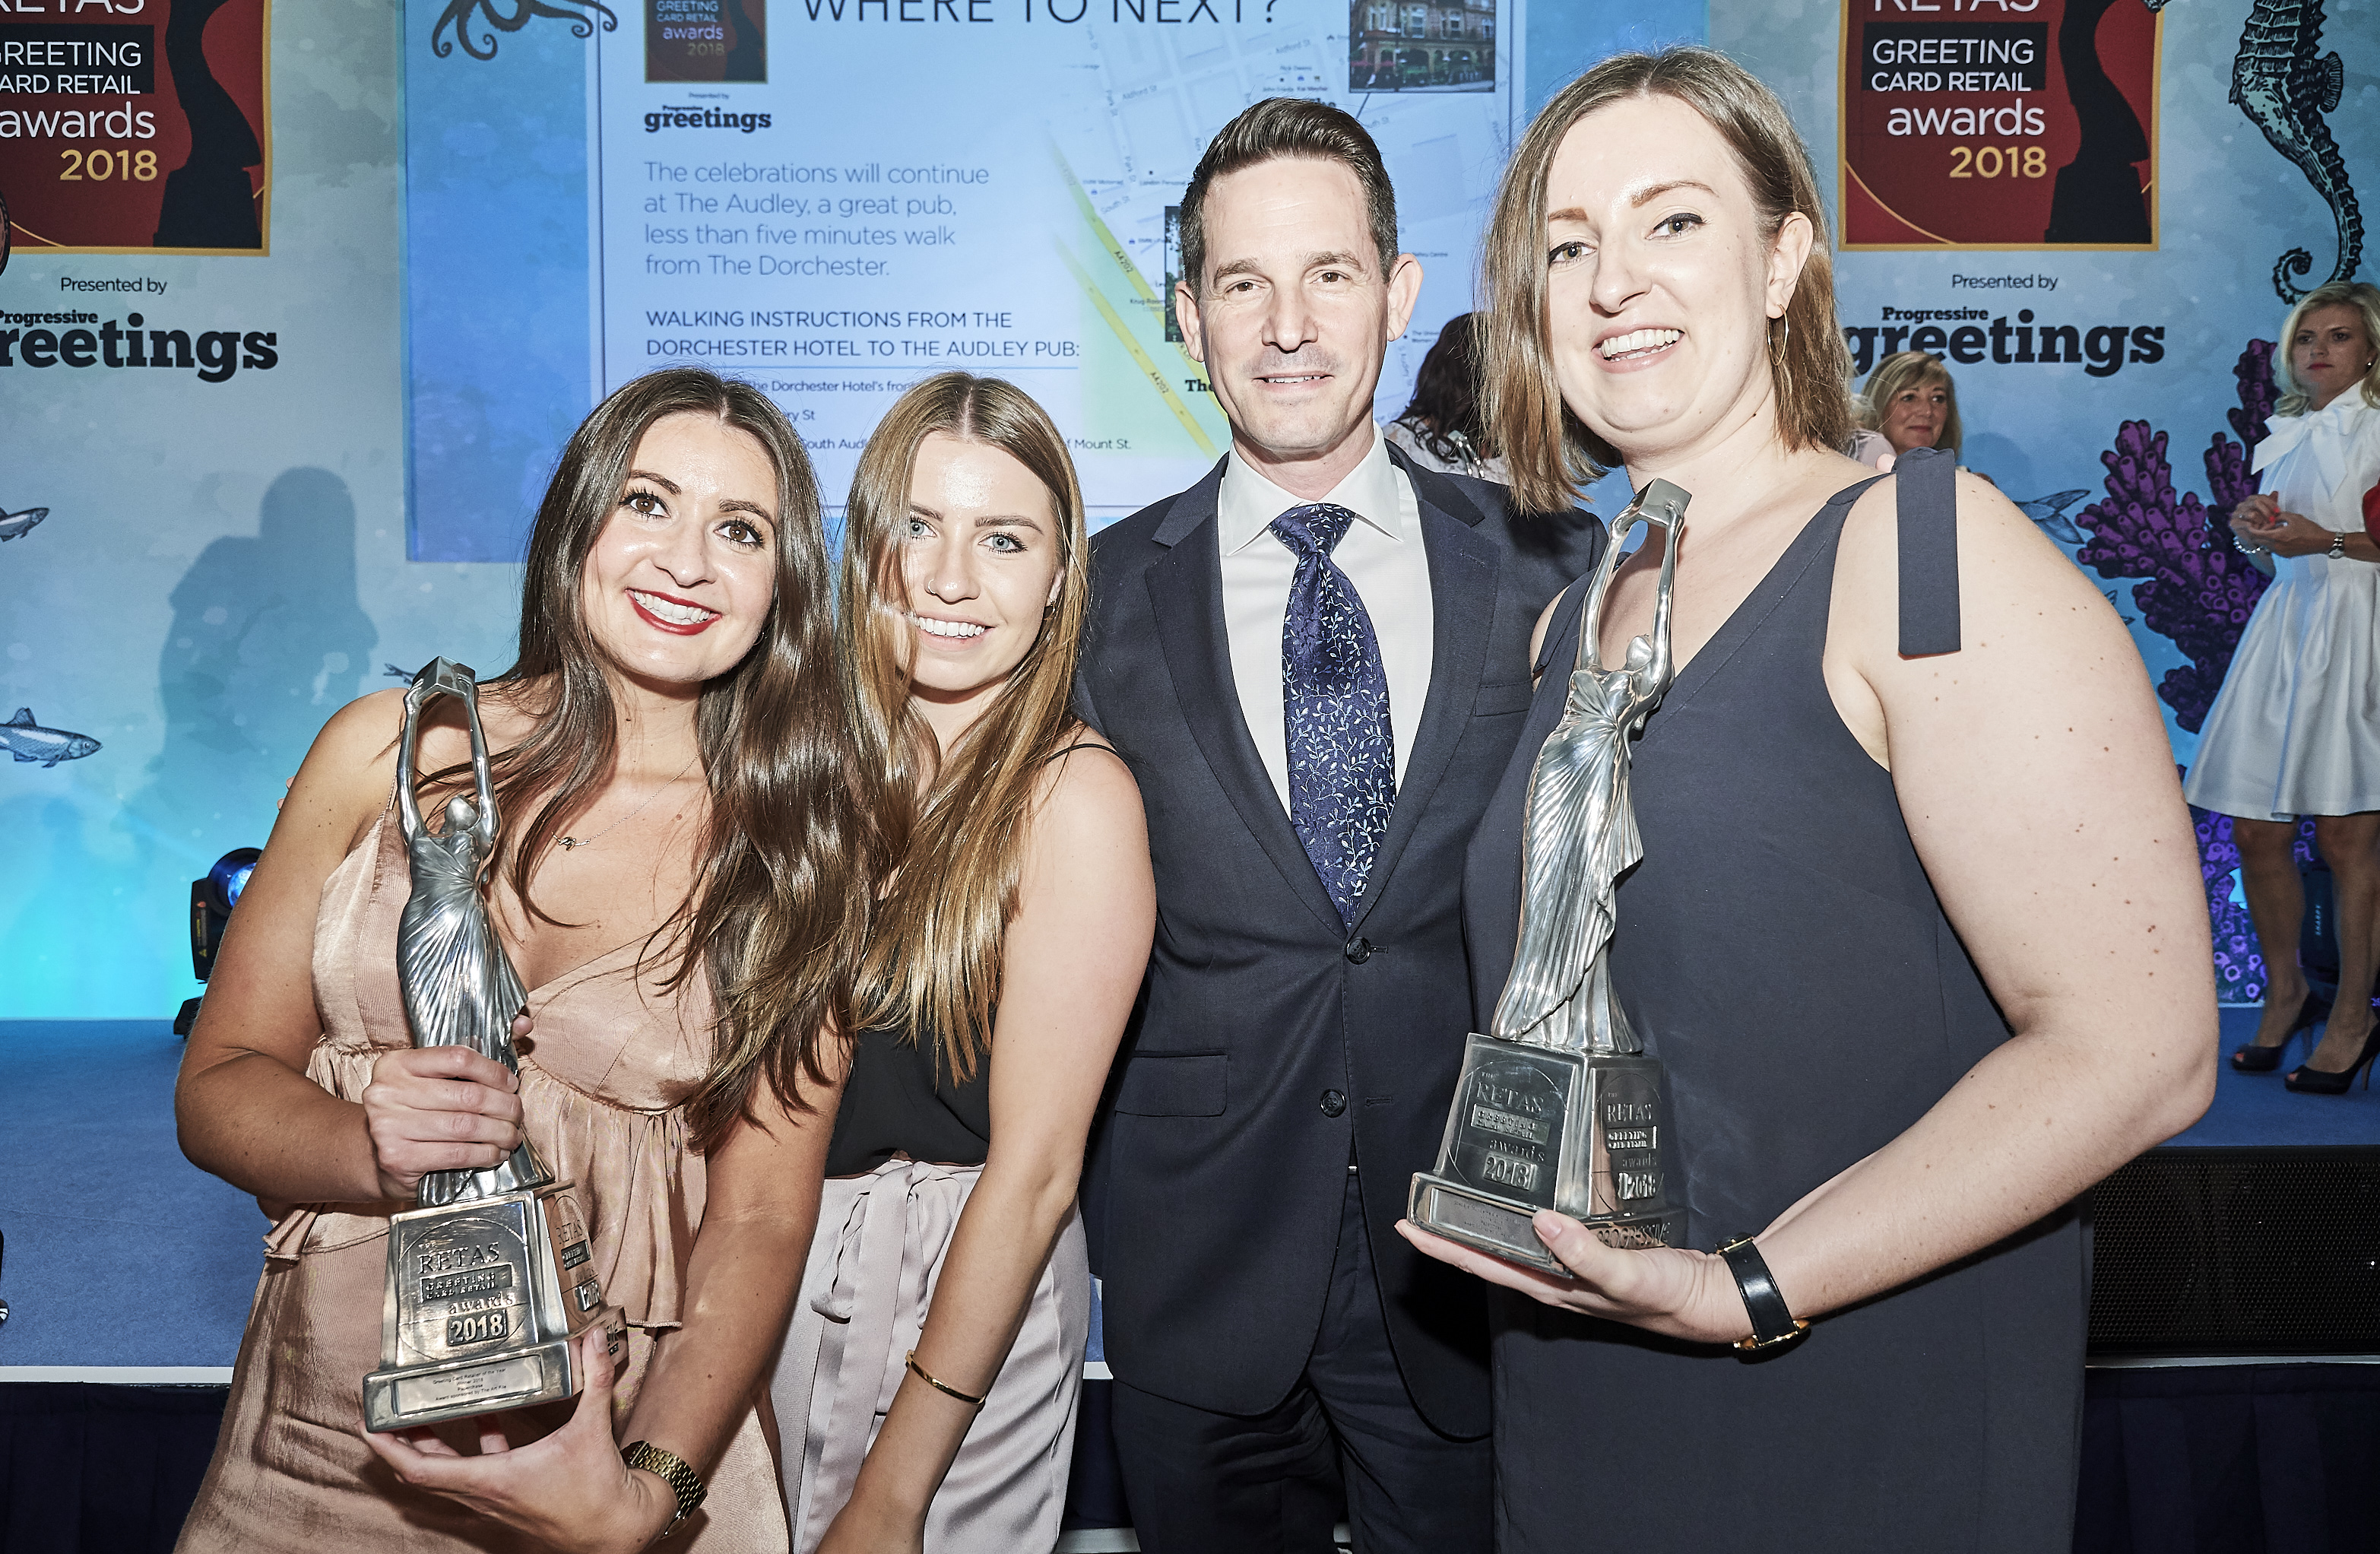 Above: Hazel Walker (right) at The Retas last year with Paperchase colleagues and their two trophies. 